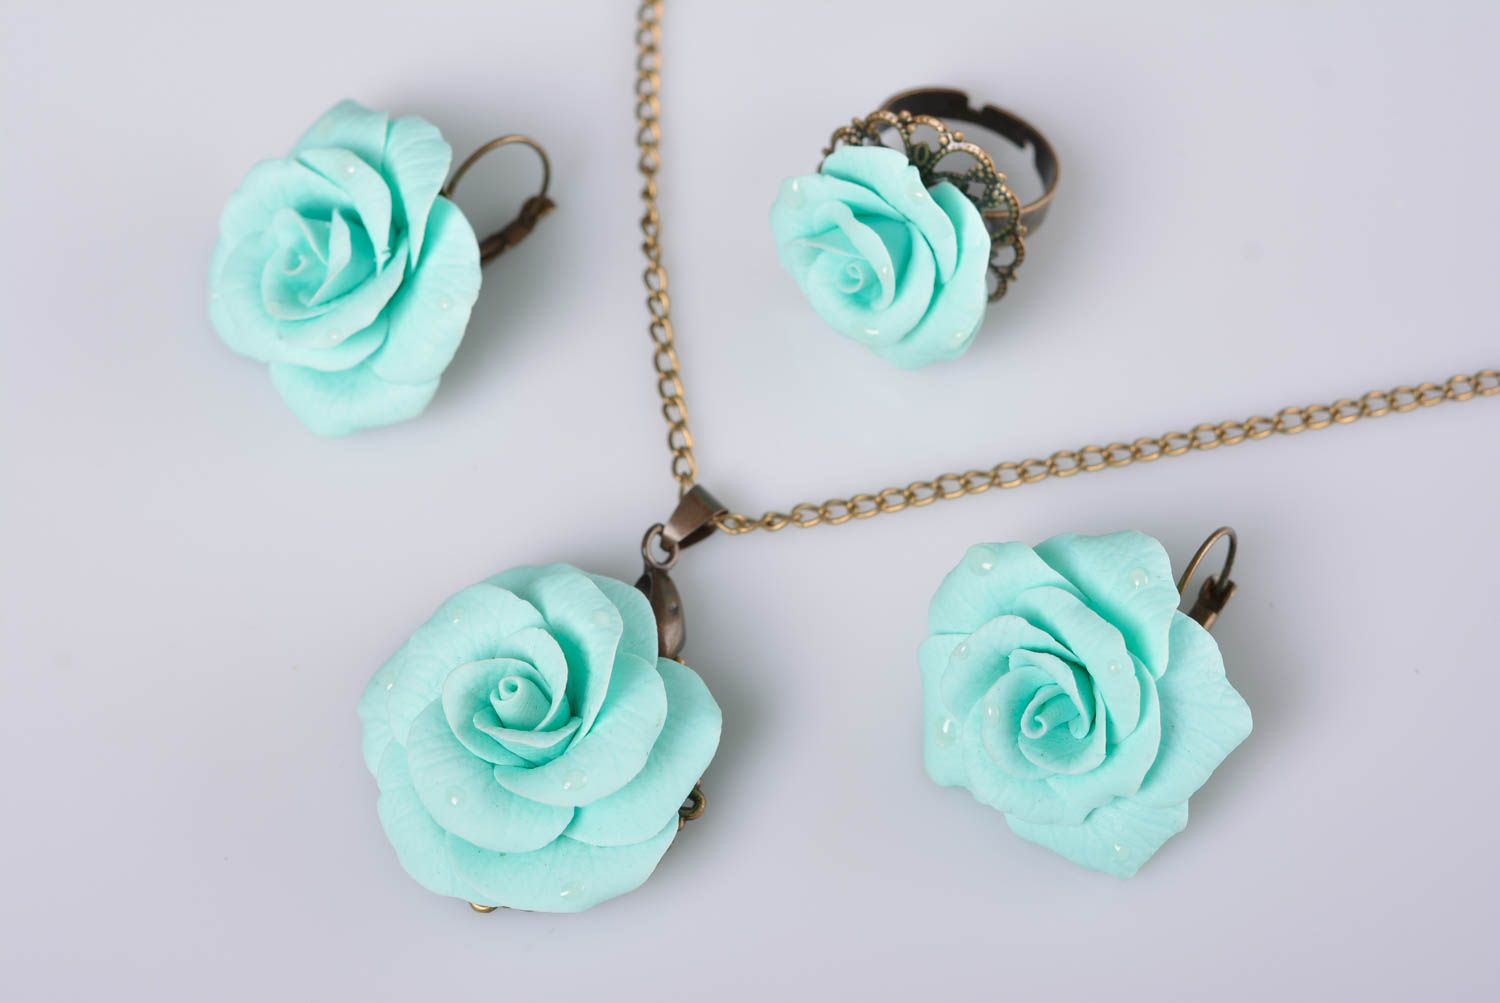 Set of handmade polymer clay floral jewelry 3 items earrings necklace and ring photo 1